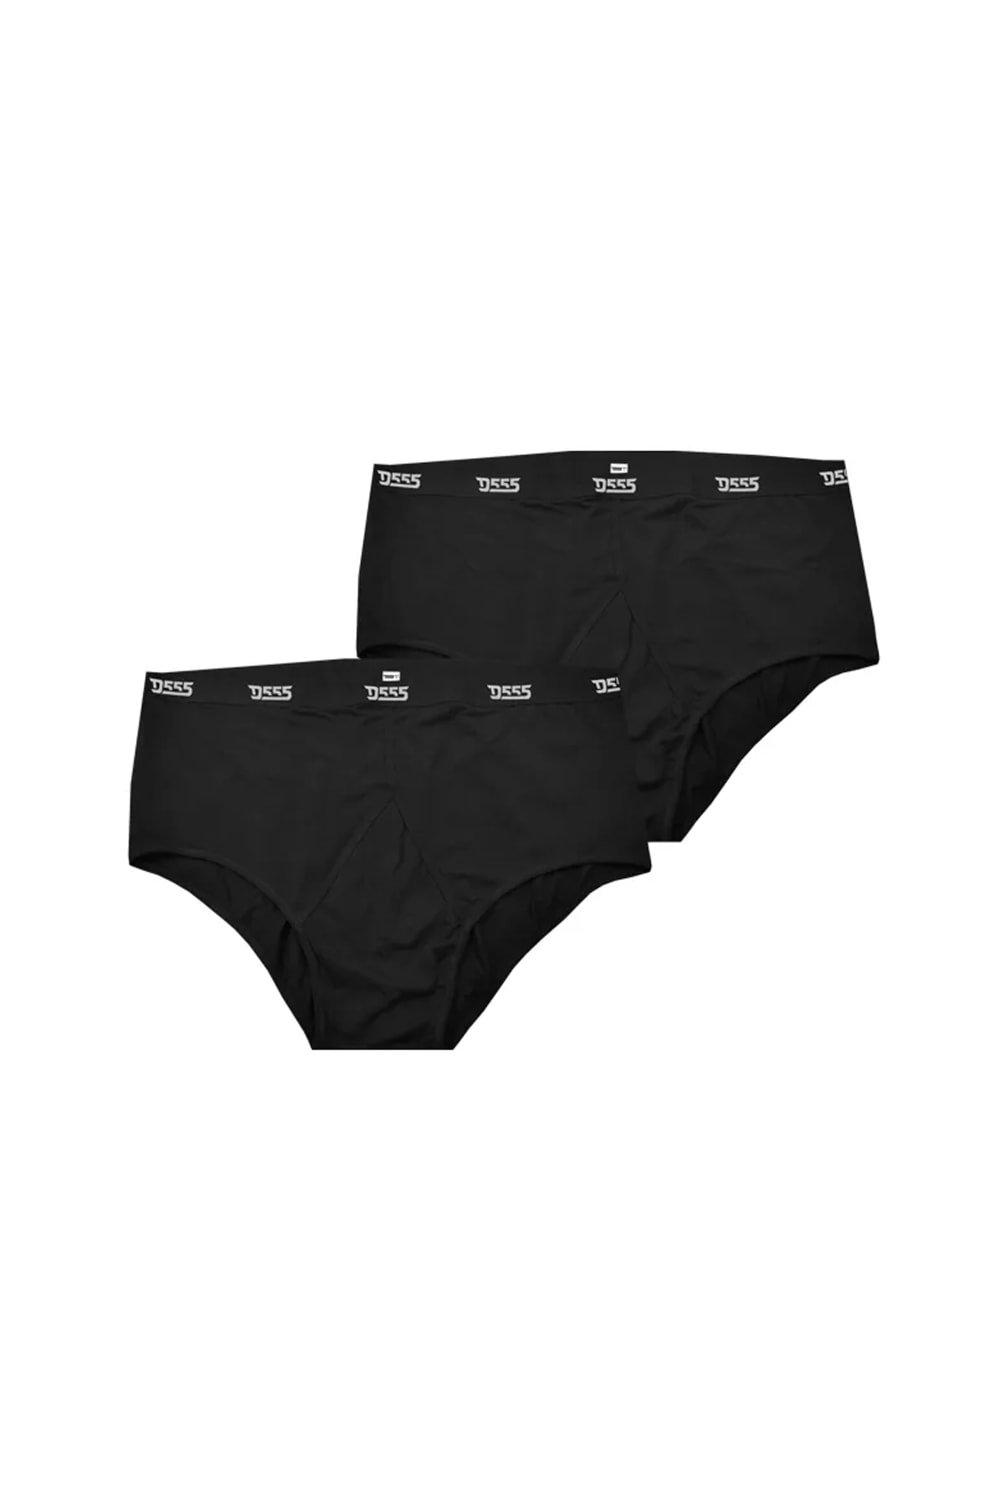 Thompson D555 Y Front Briefs (Pack of 2)